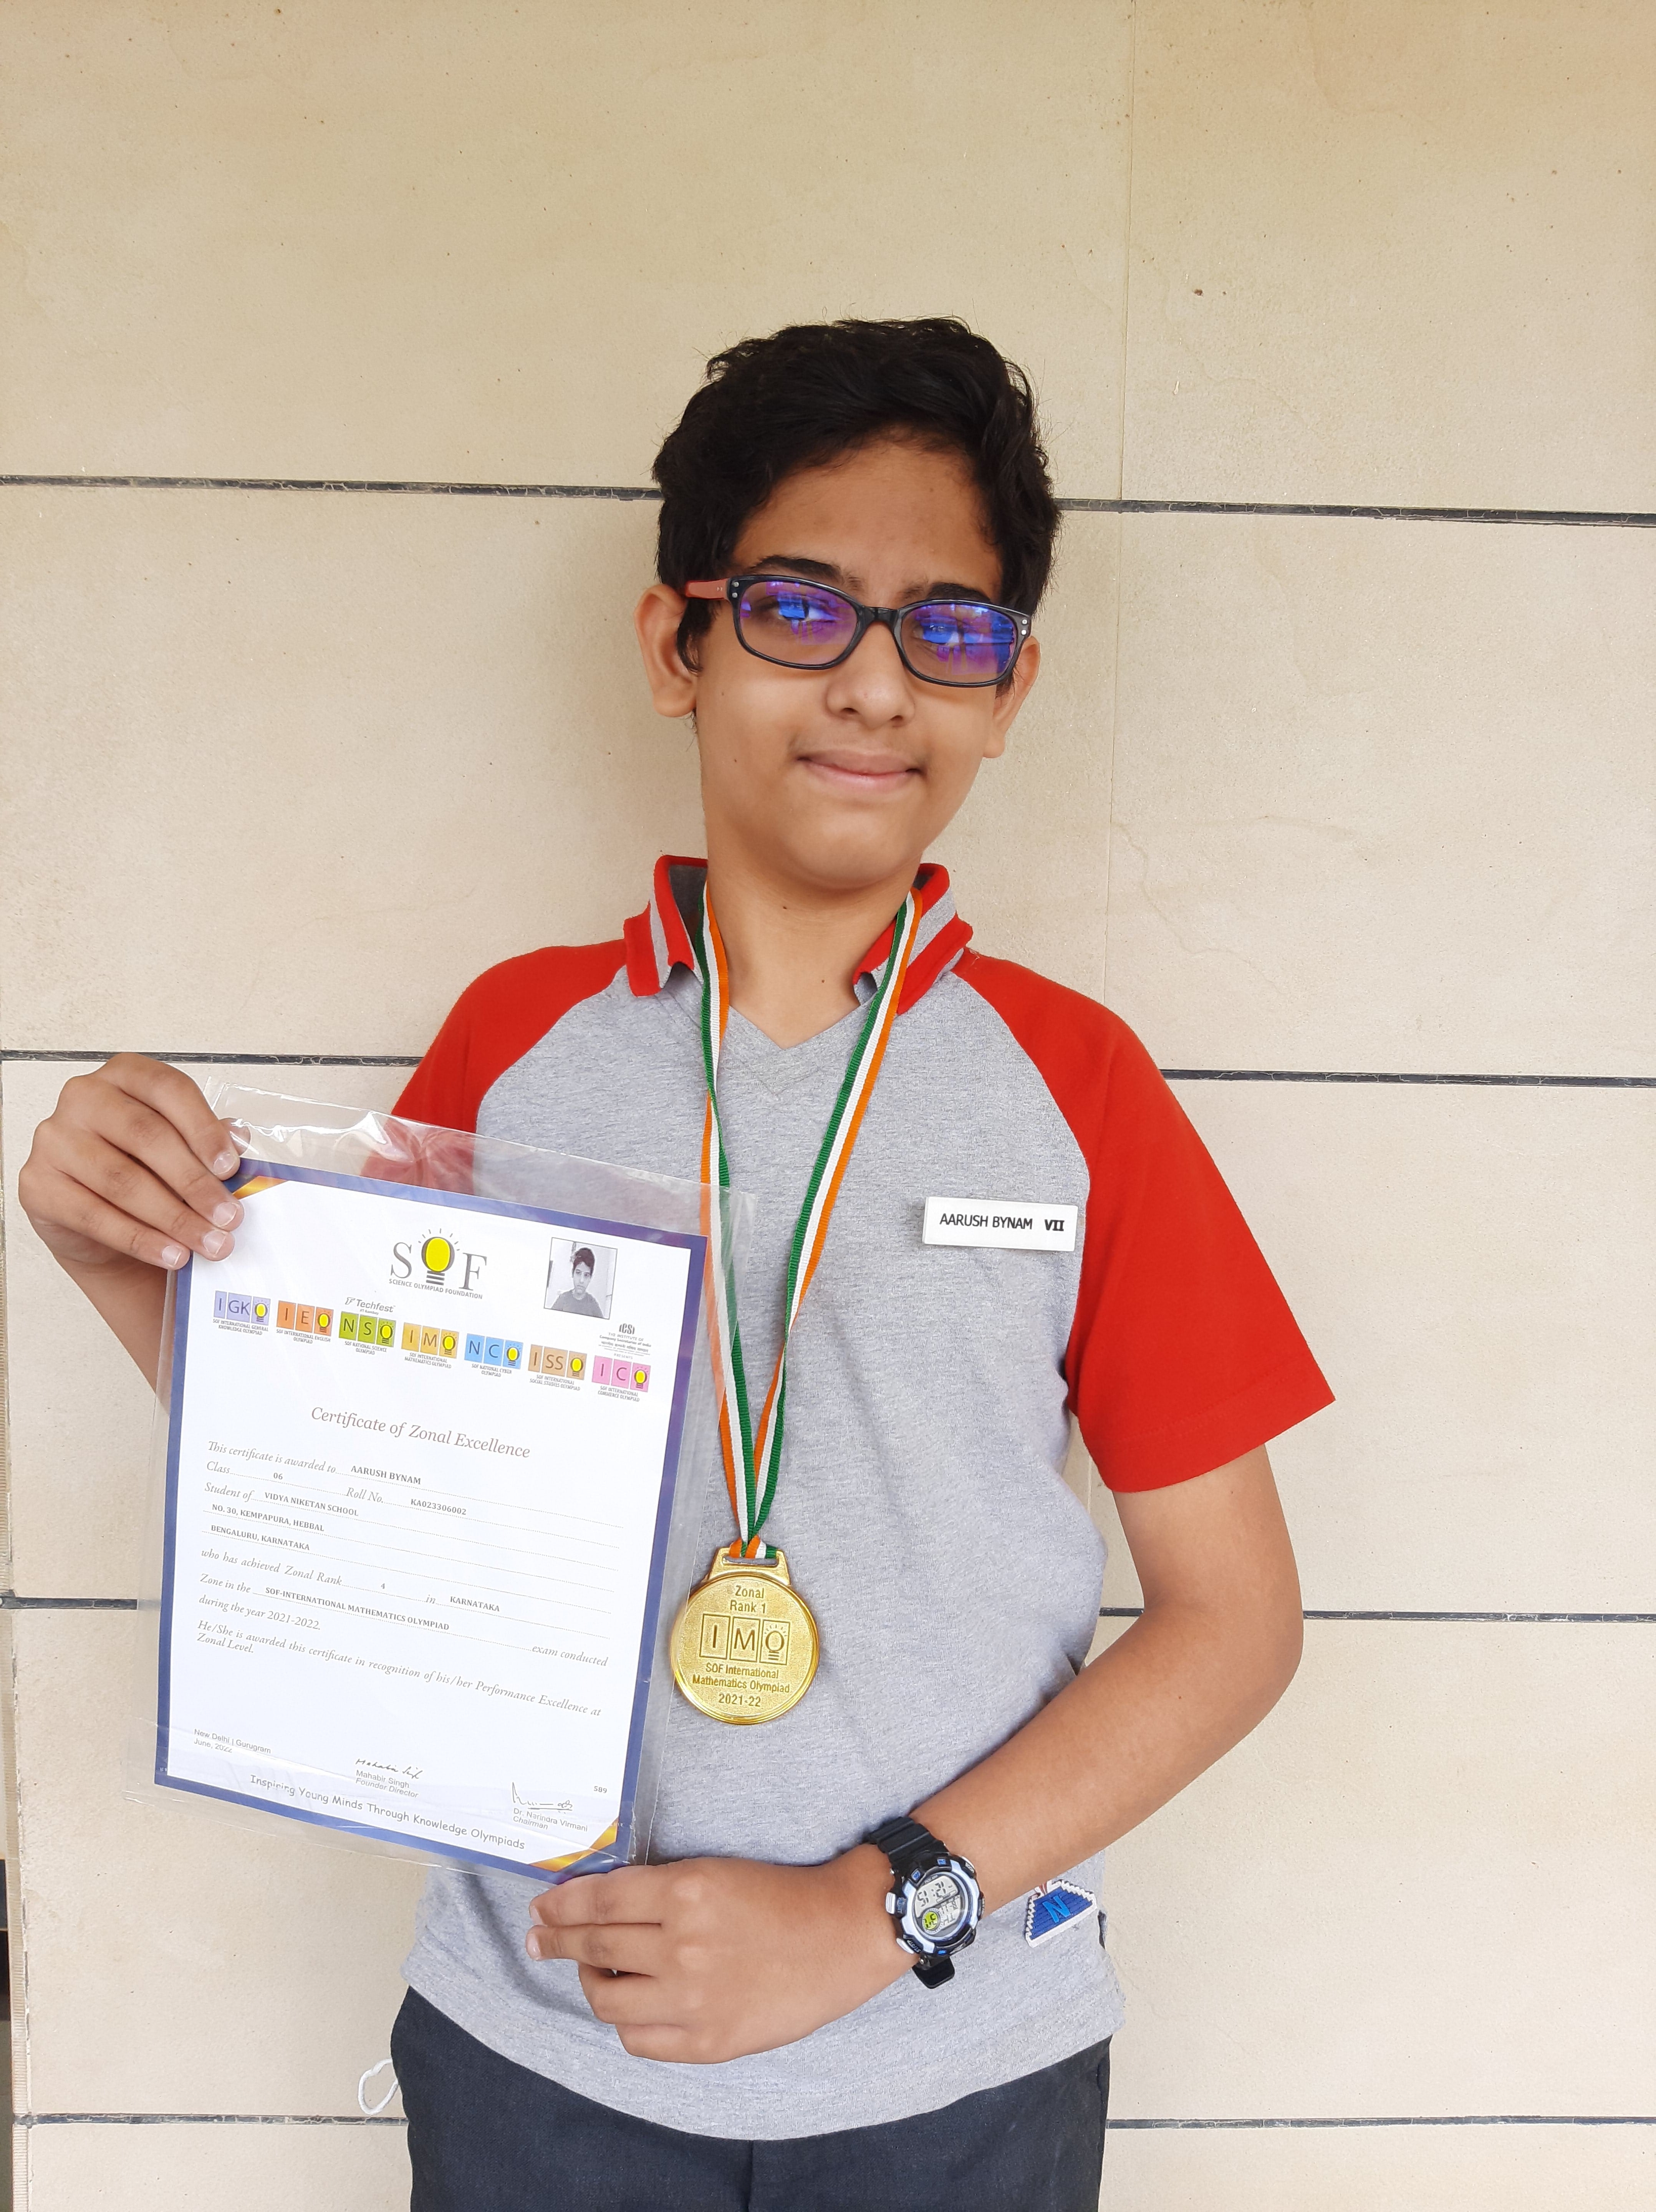 <strong>Aarush Bynam</strong> of Grade 7 secured 4<sup>th</sup> zonal rank in the International Mathematics Olympiad organized by SOF during the year 2021-22. Congratulations for this commendable performance!